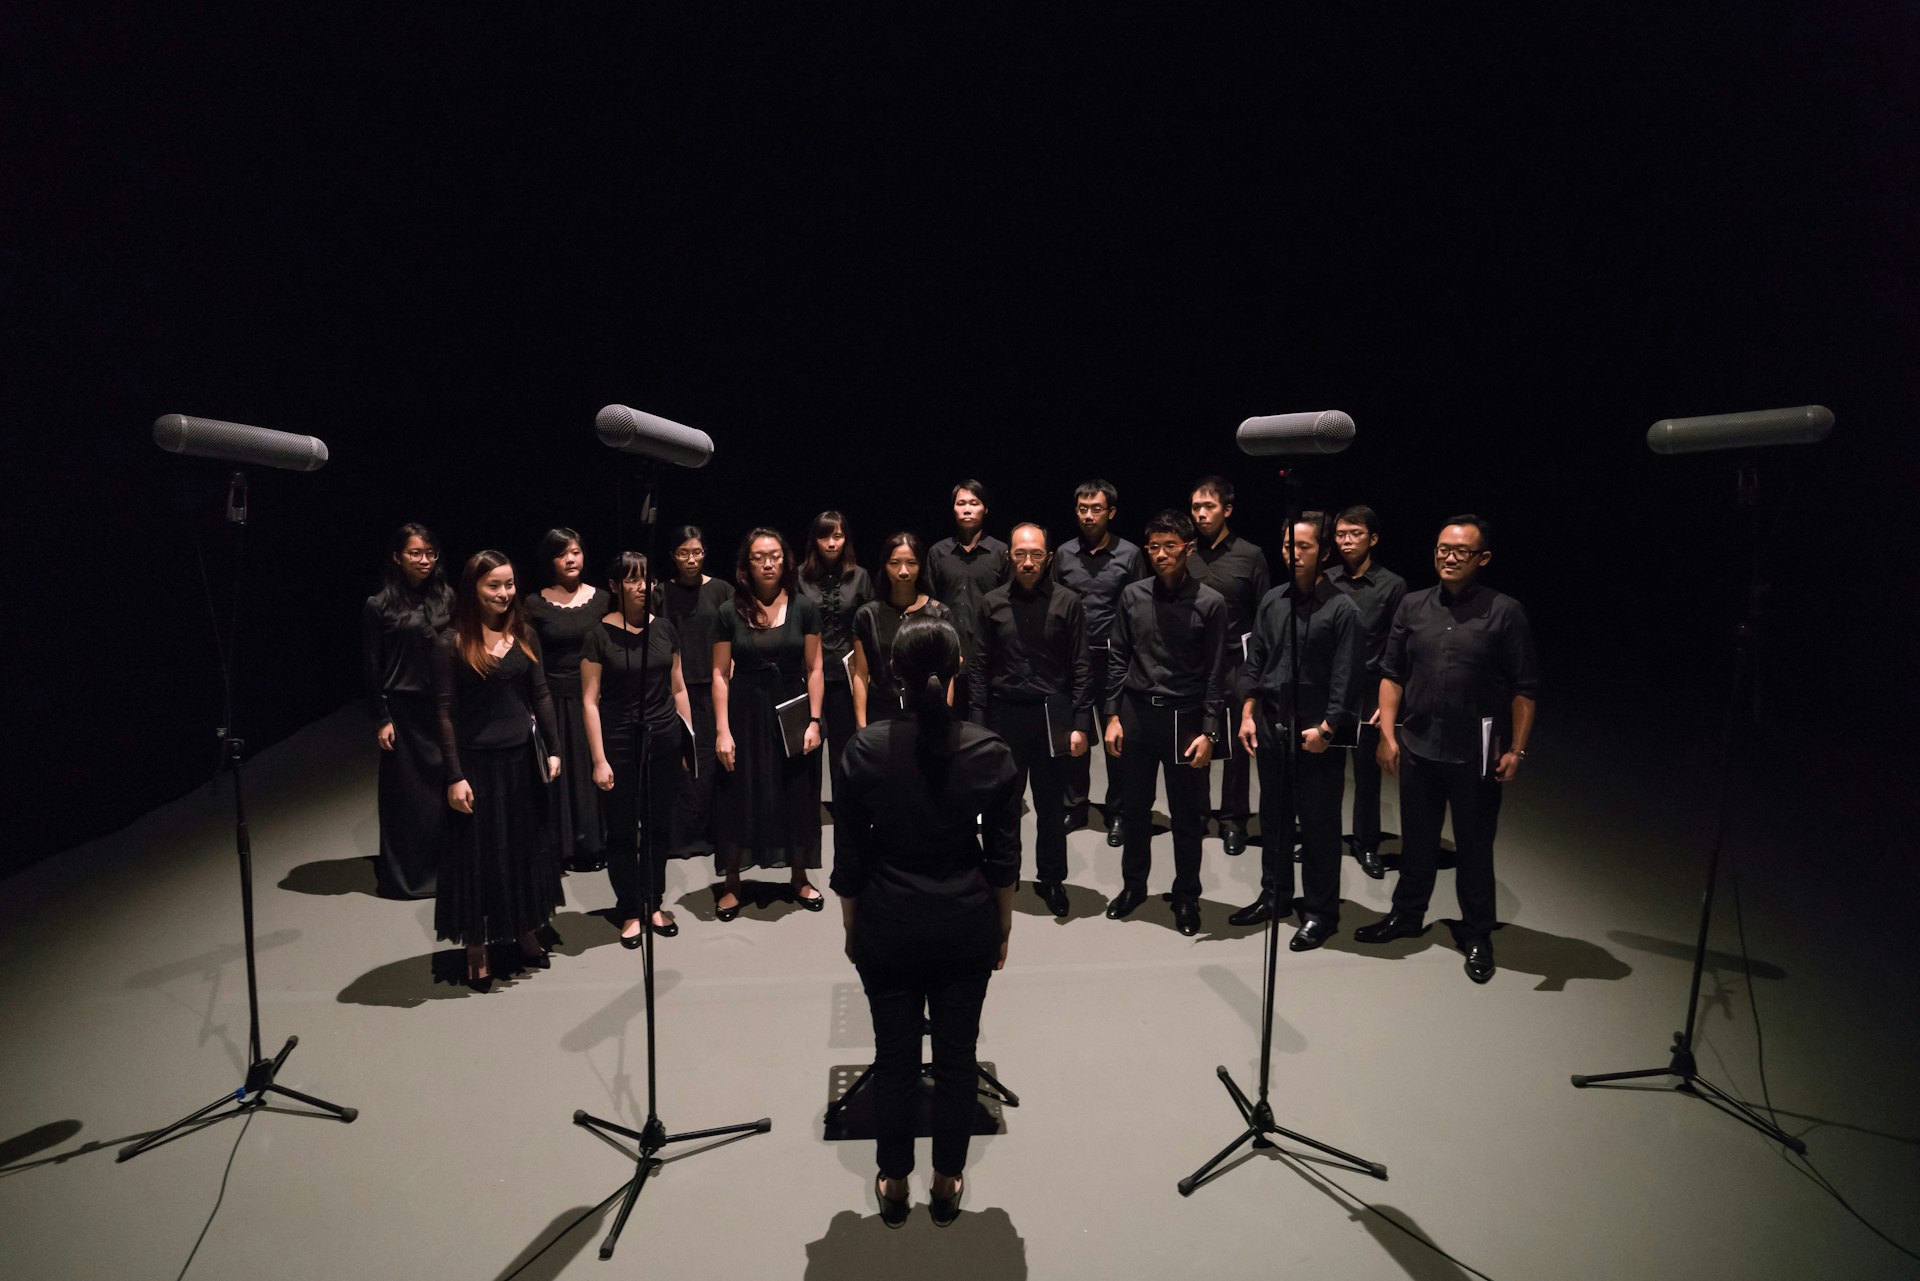 Samson Young, "Muted Situations #5: Muted Chorus" (Video), 2014. Courtesy of MOCA Taipei.